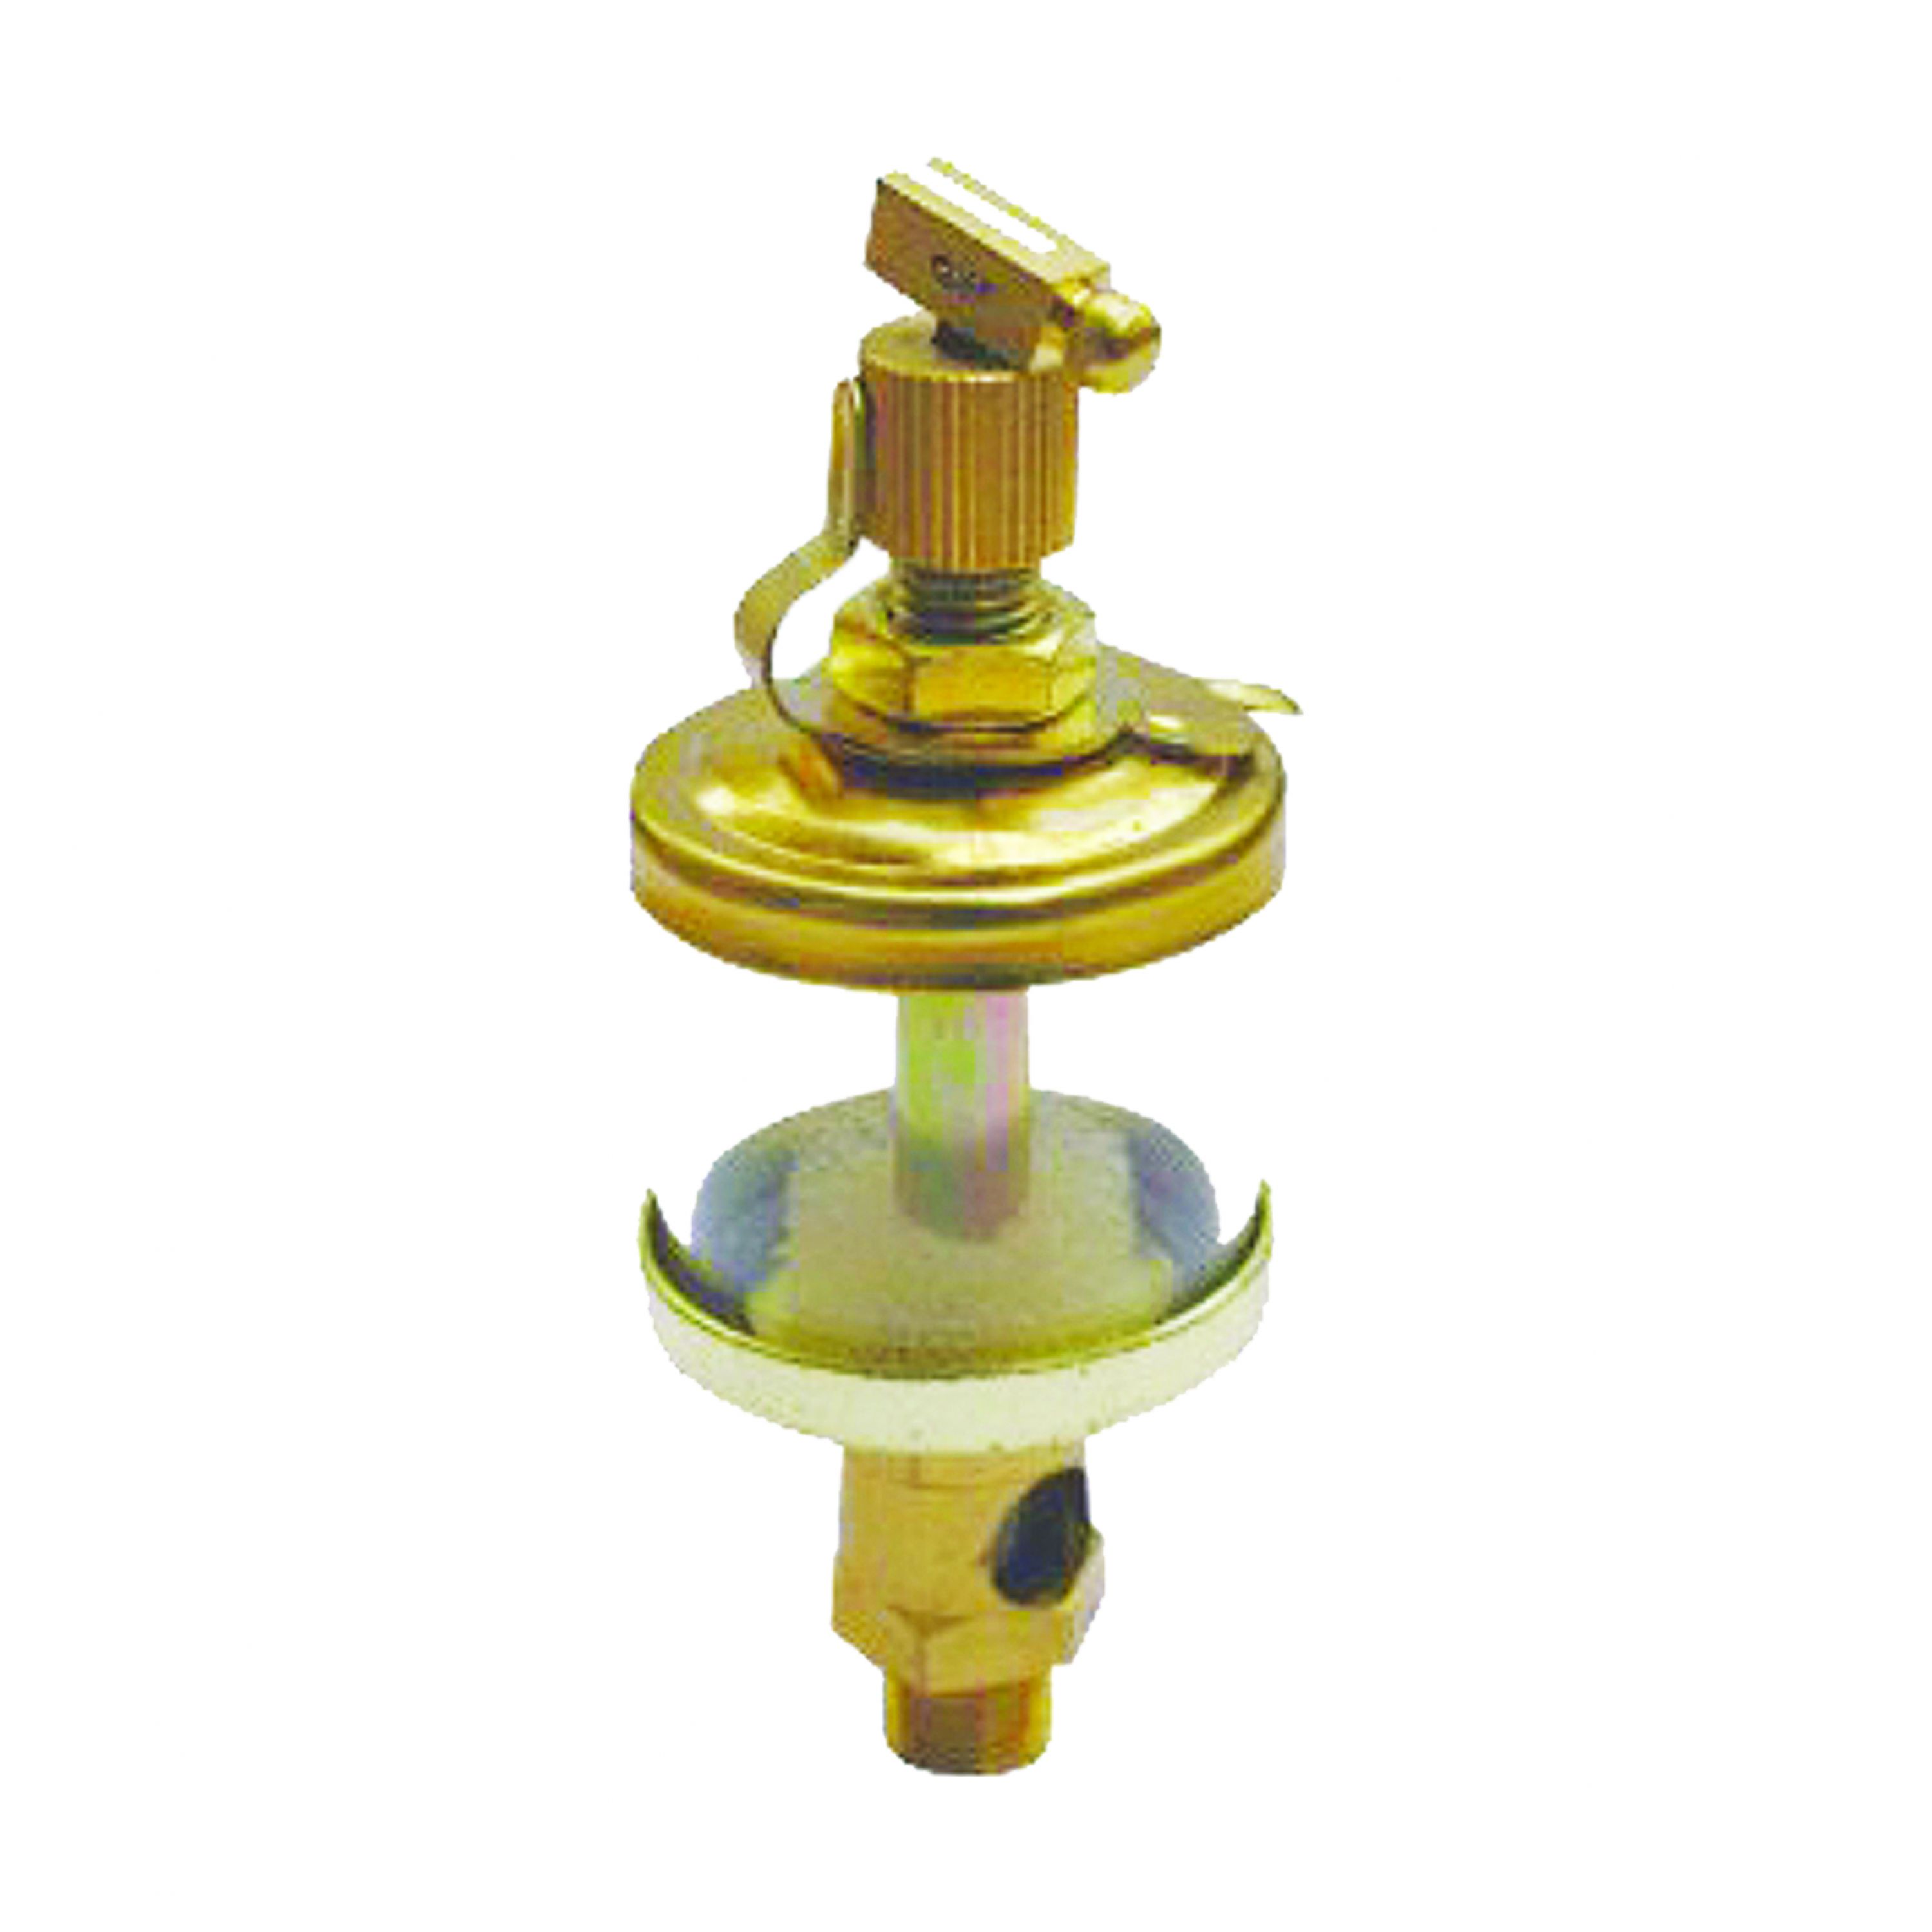 needle valve oil injection cup image